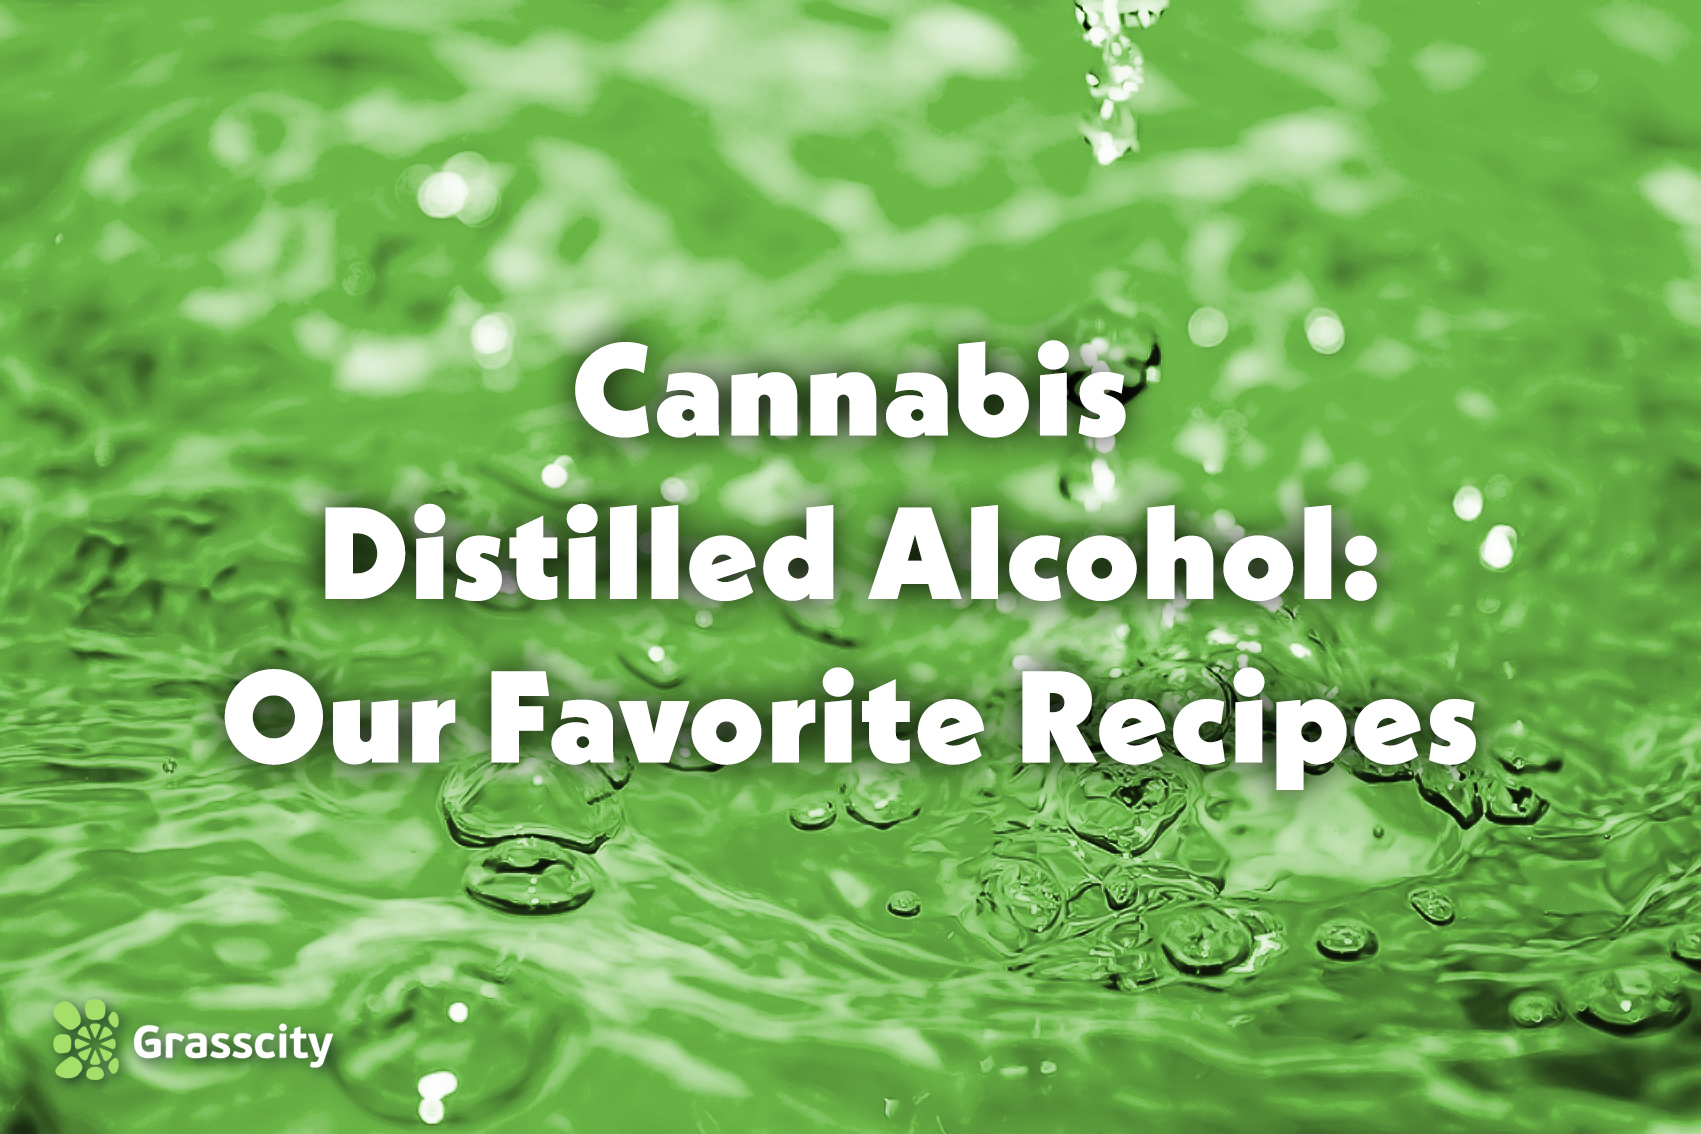 Cannabis Distilled Alcohol: Our Favorite Recipes